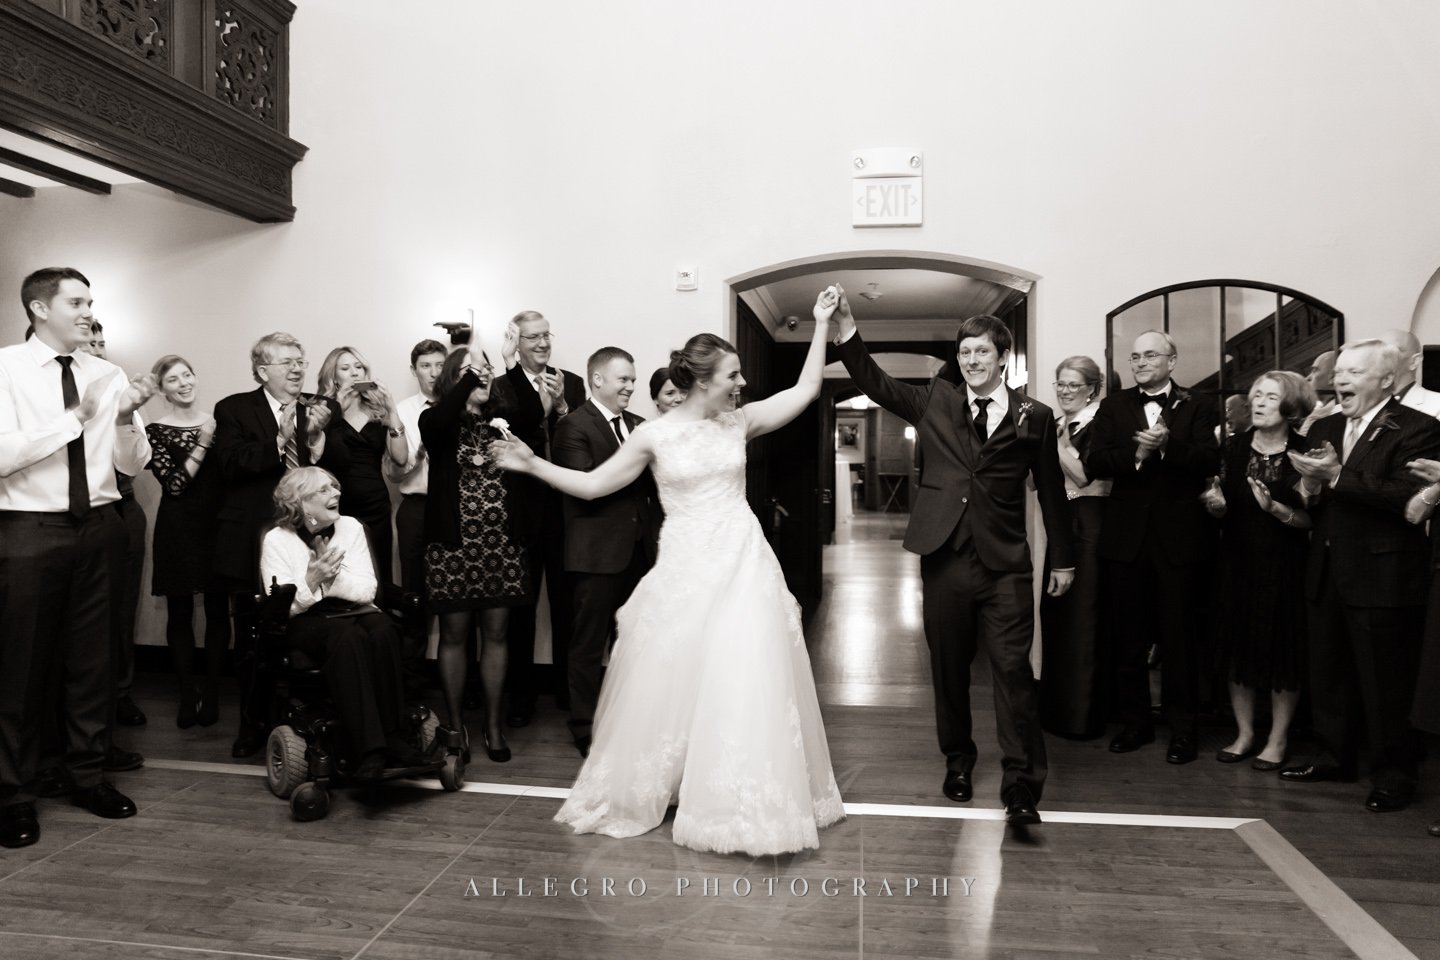 entrance - photo by allegro photography